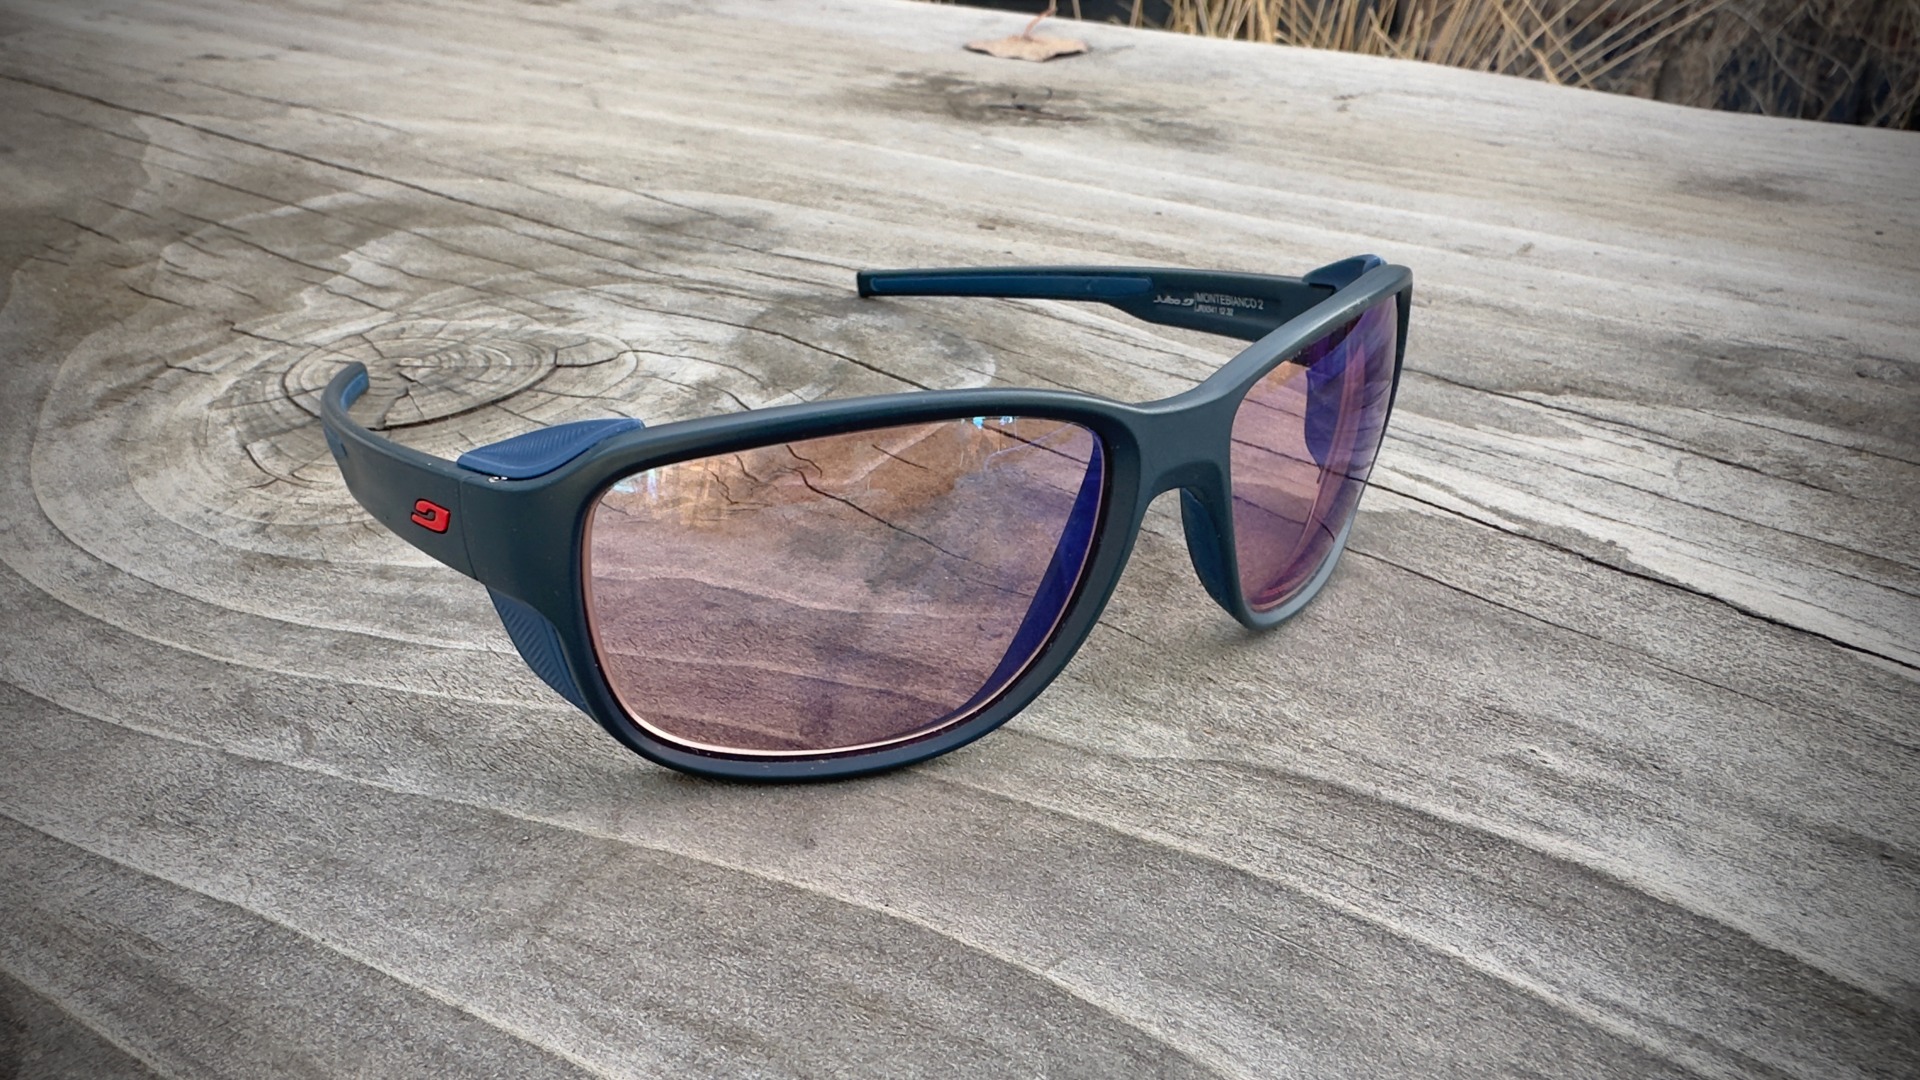 Julbo’s Montebianco 2 with the Reactiv 1-3 High Contrast lens: A Review